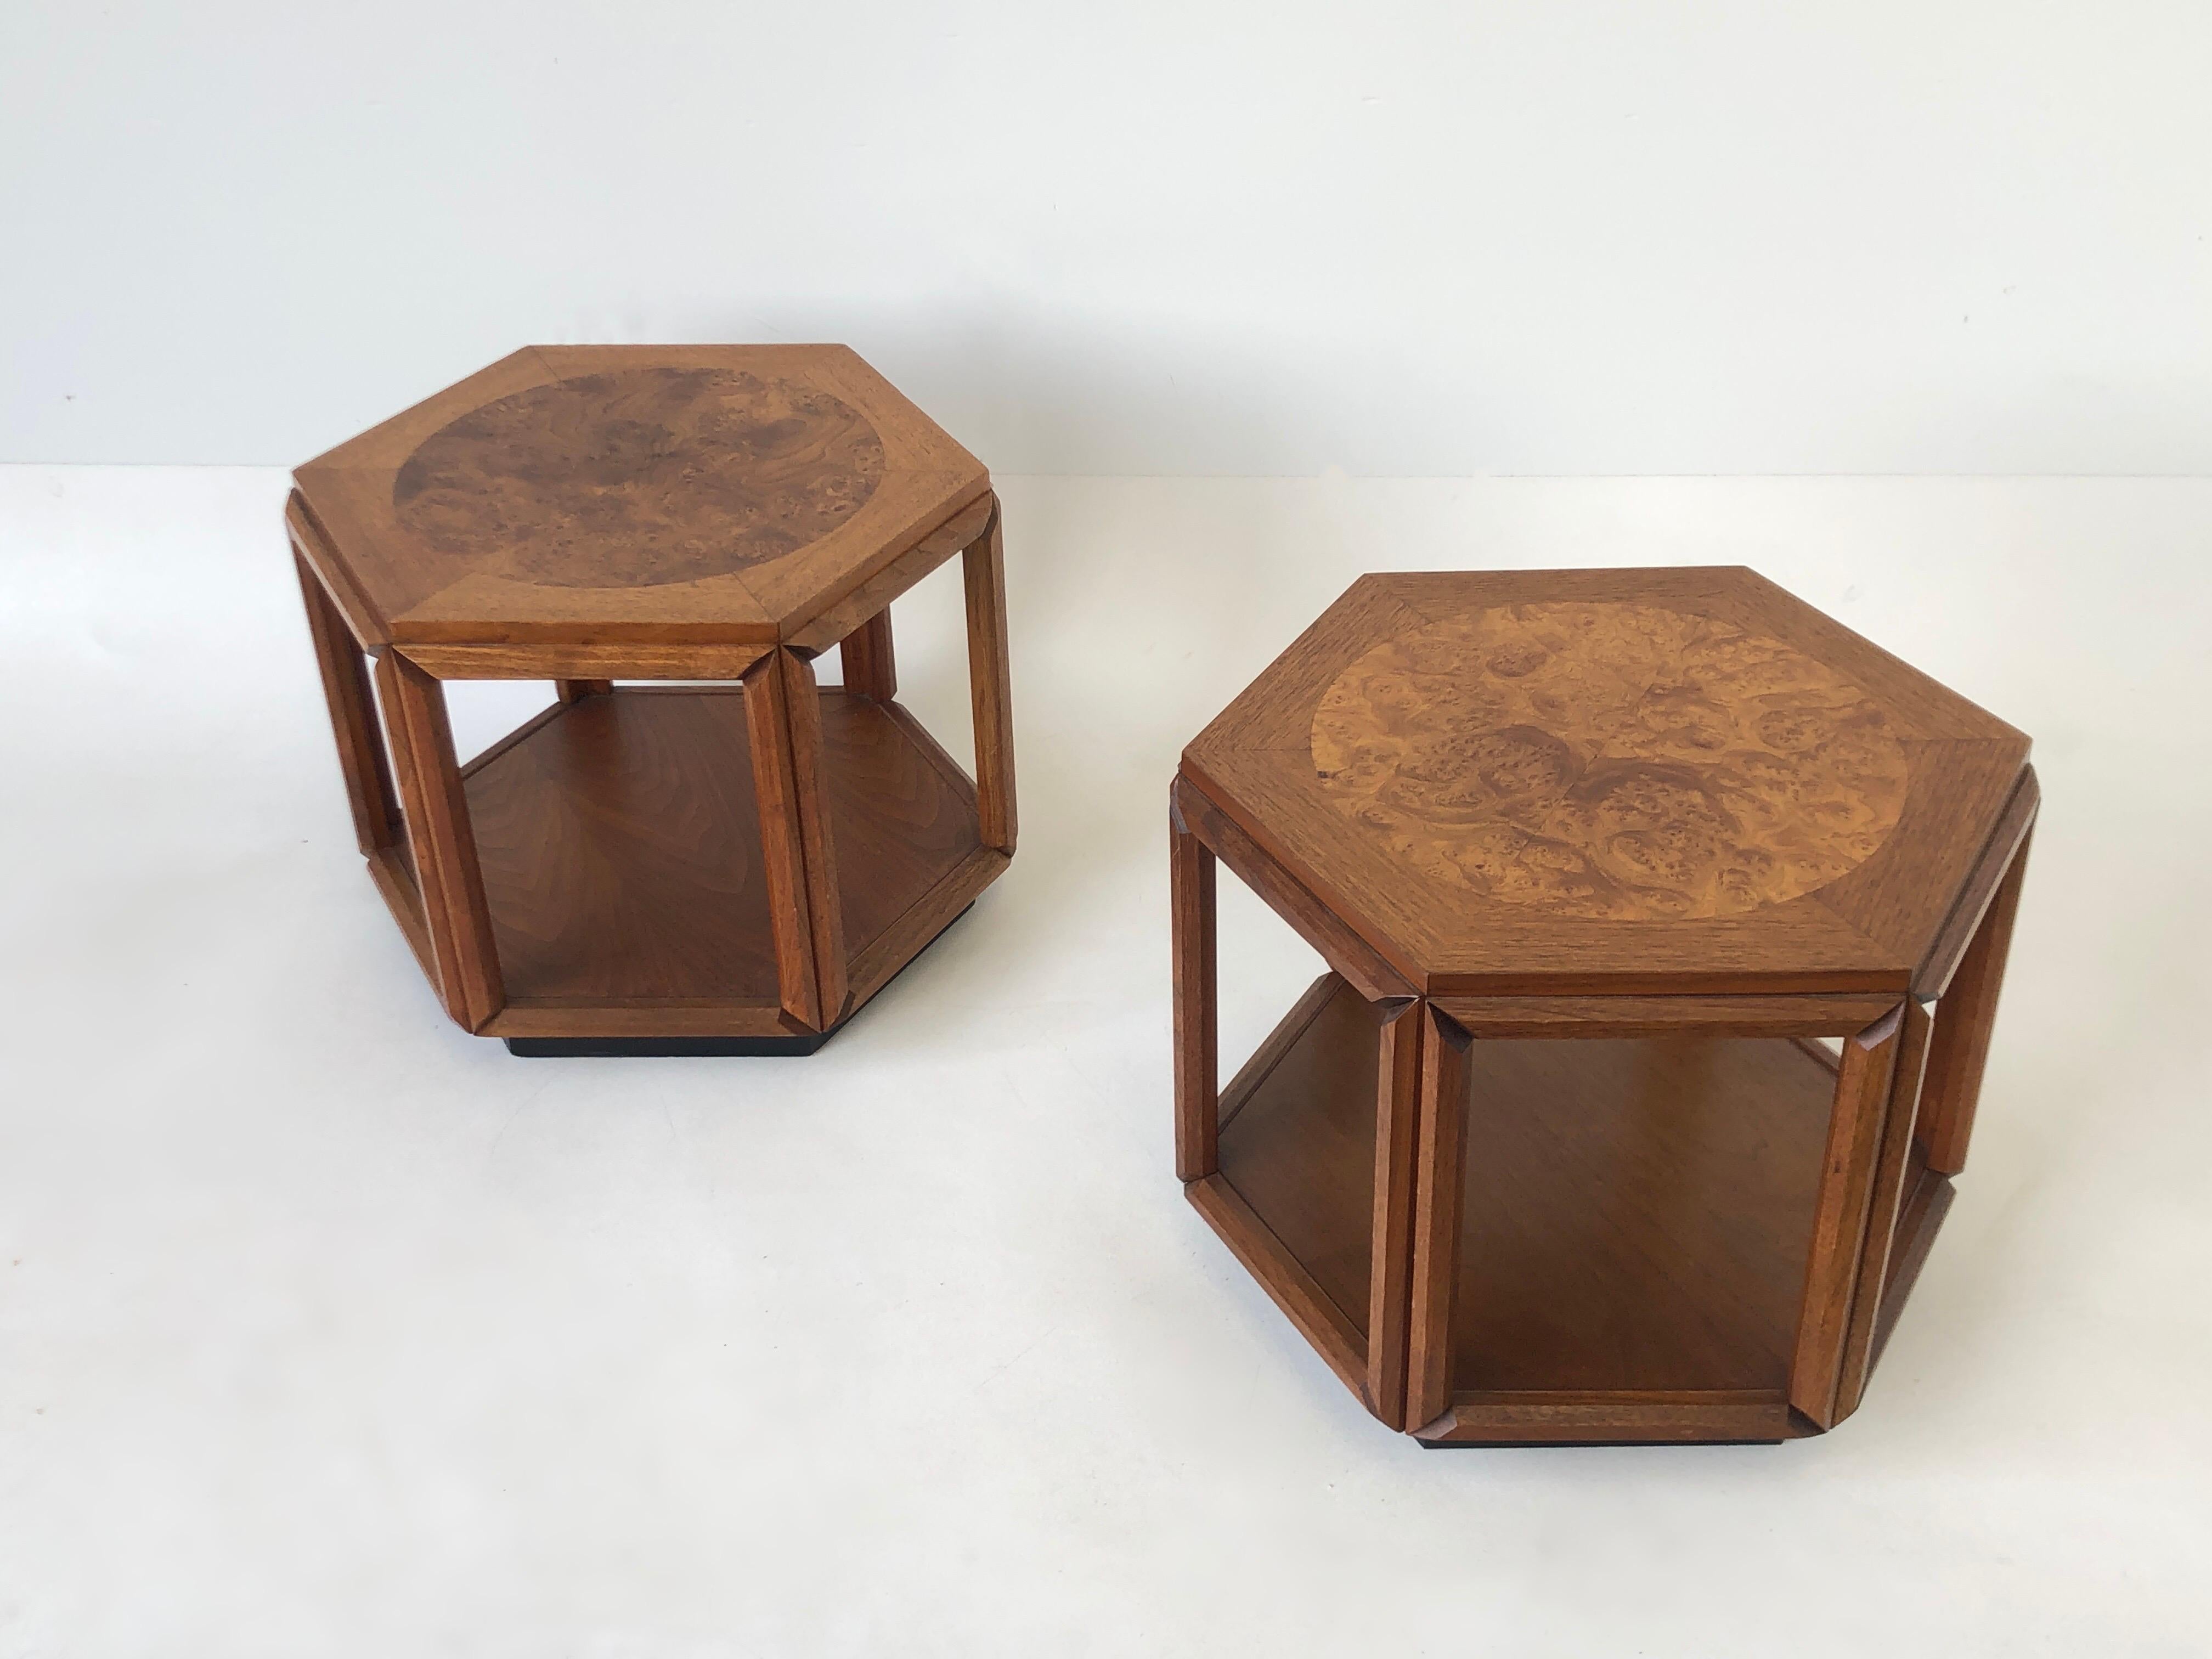 Pair of hexagonal shape side tables design by John Keal for Brown Saltman in the 1970’s.
Constructed of walnut with a burl wood circle on the top. 
In beautiful vintage condition with minor wear consistent with age.
Measurements: 15.38” high